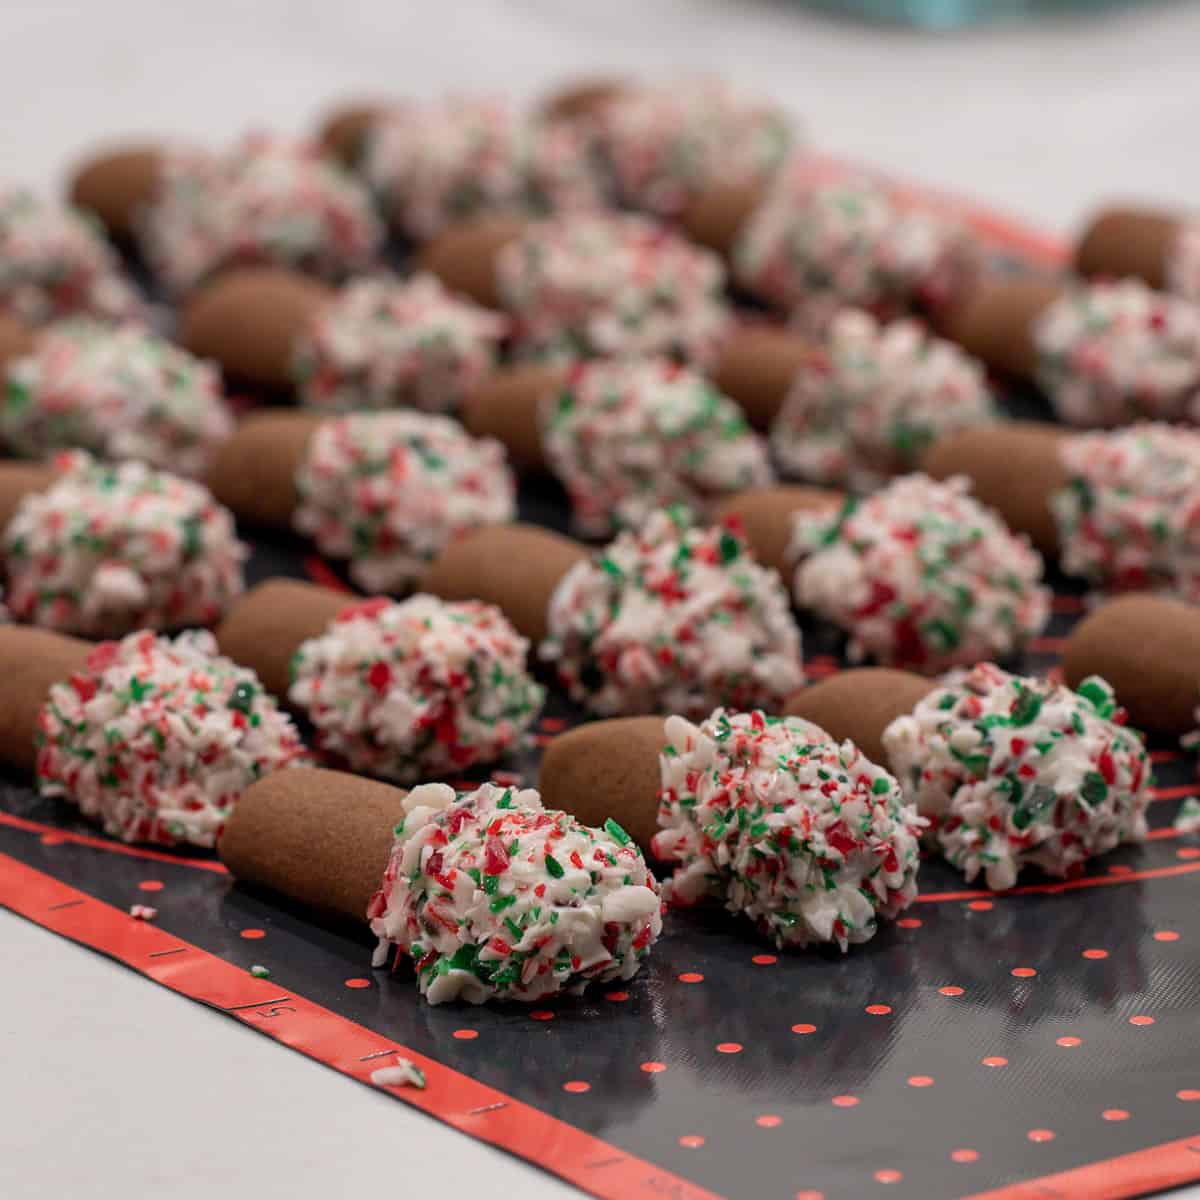 Dipped cookies resting on a silicone mat.